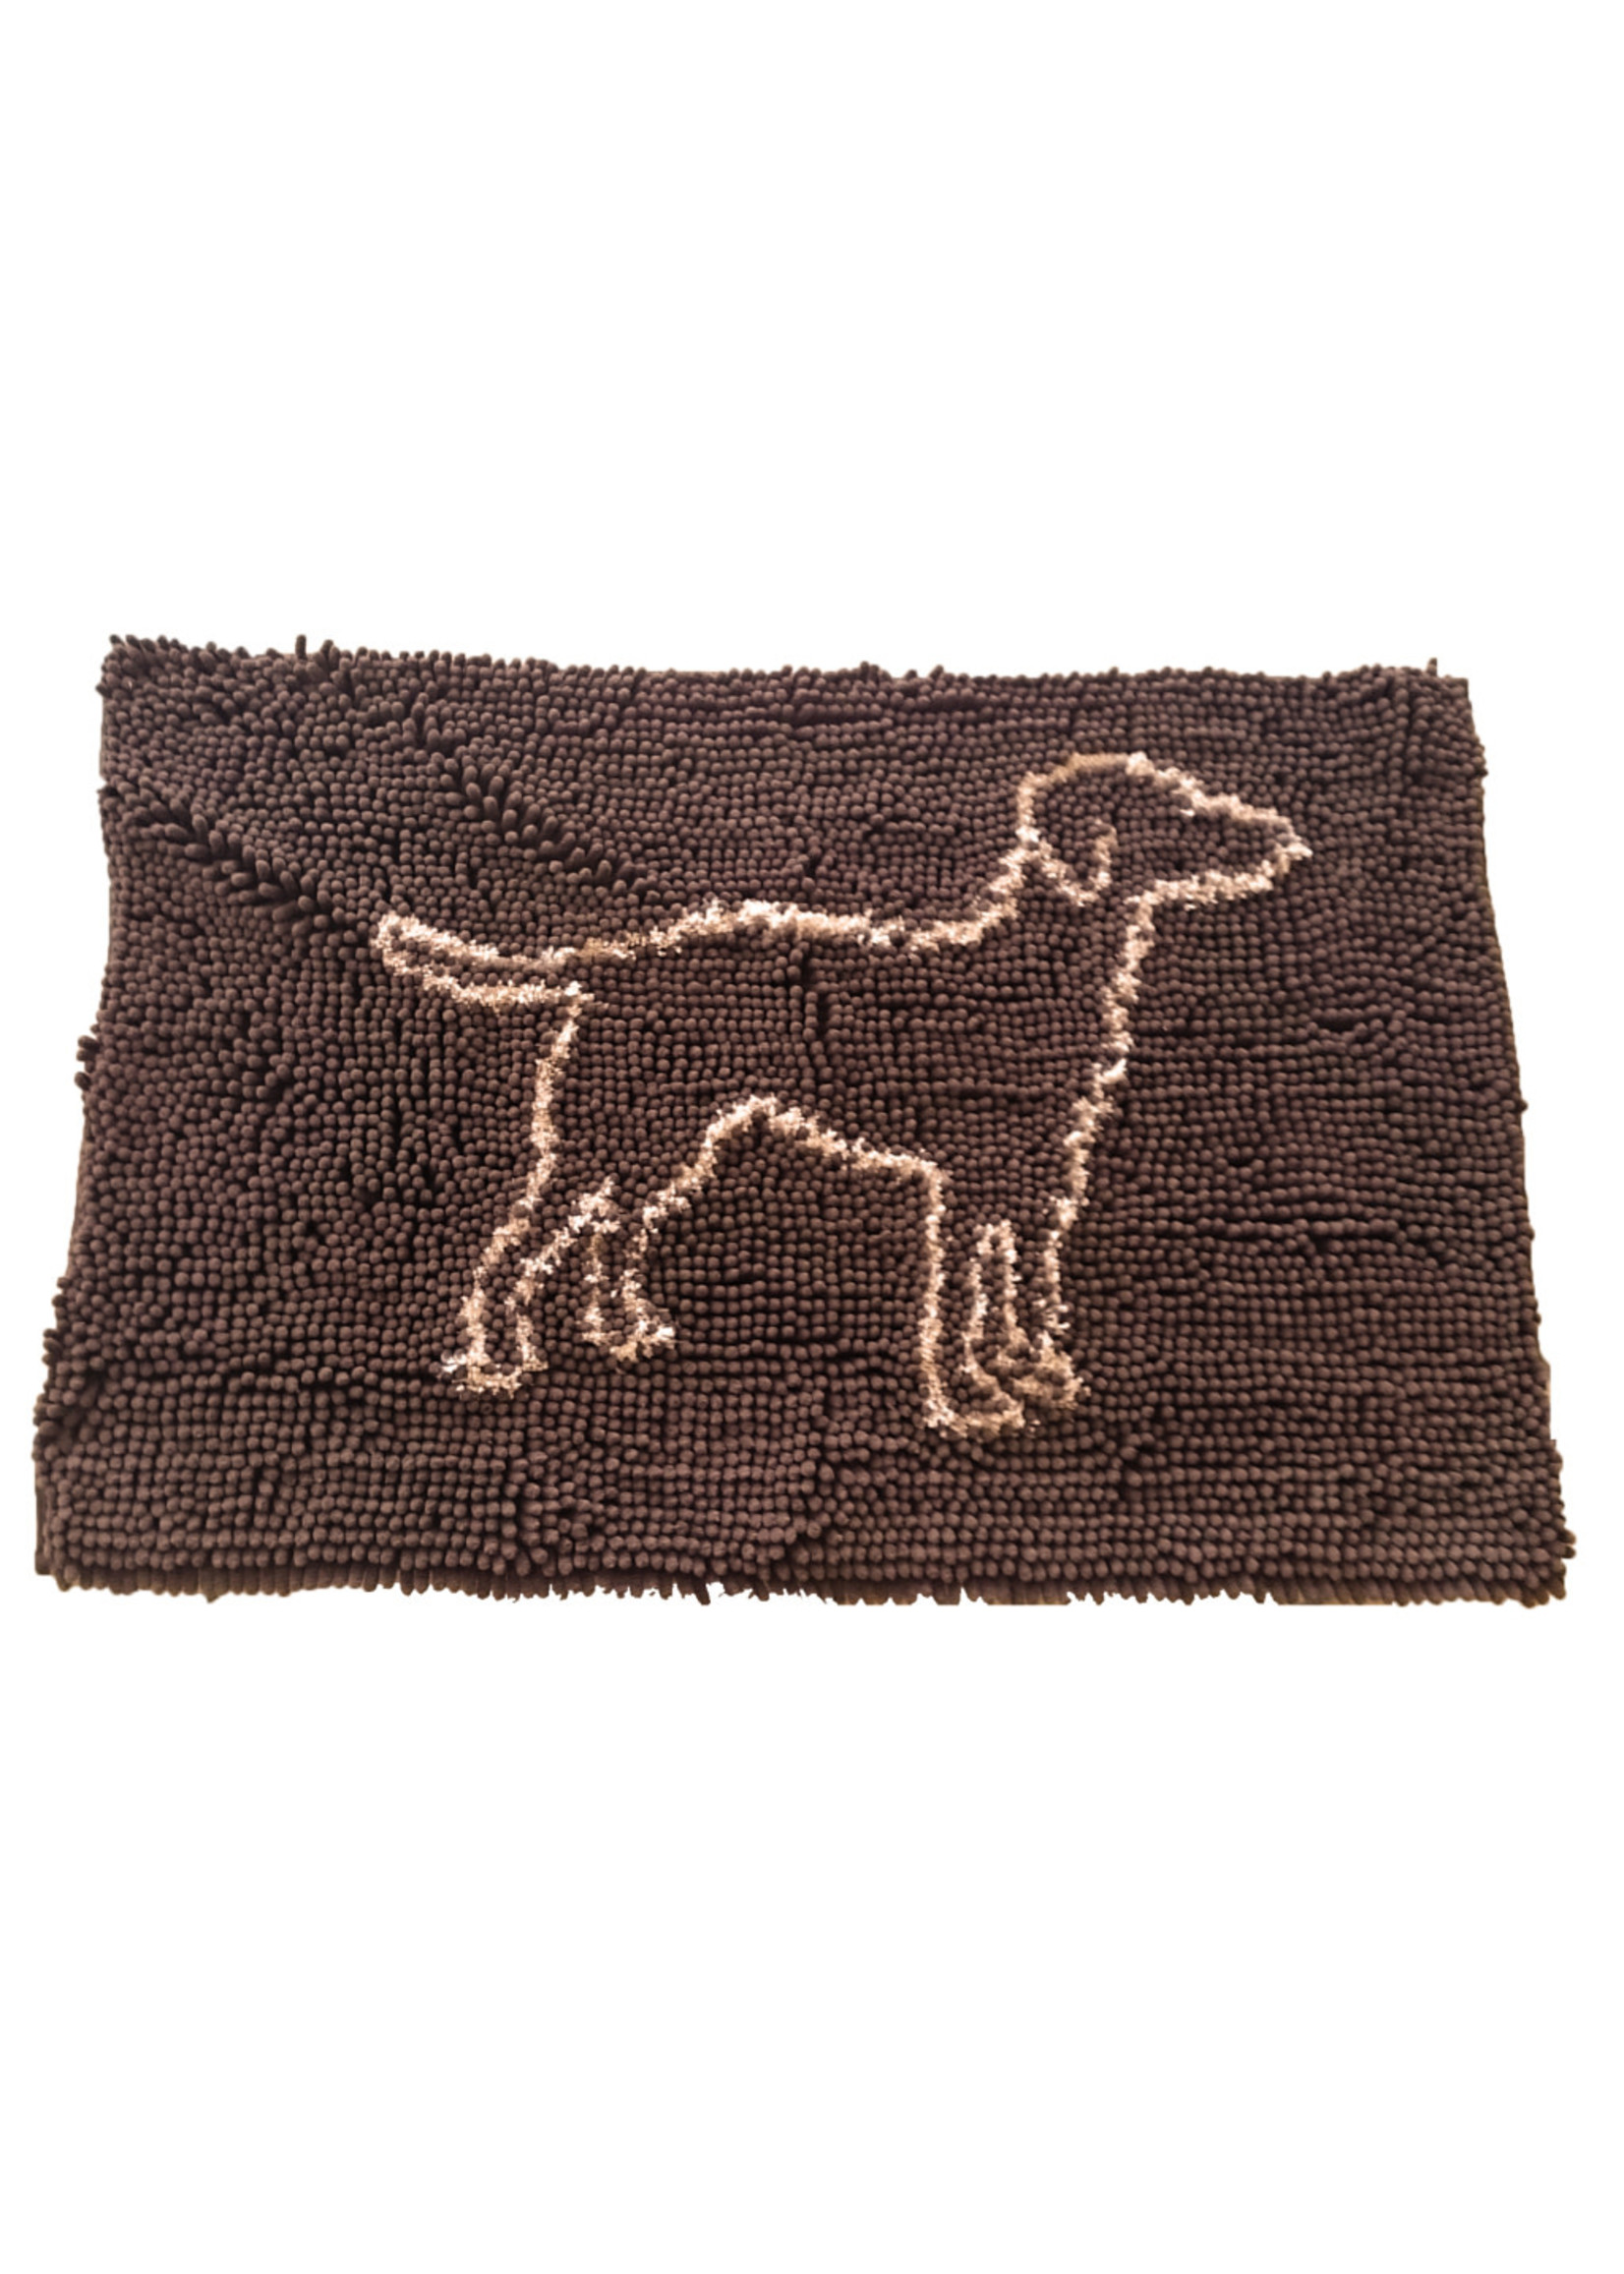 Ethical Products, Inc. Spot Clean Paws 35x24" Micro-Fiber Mat in Brown